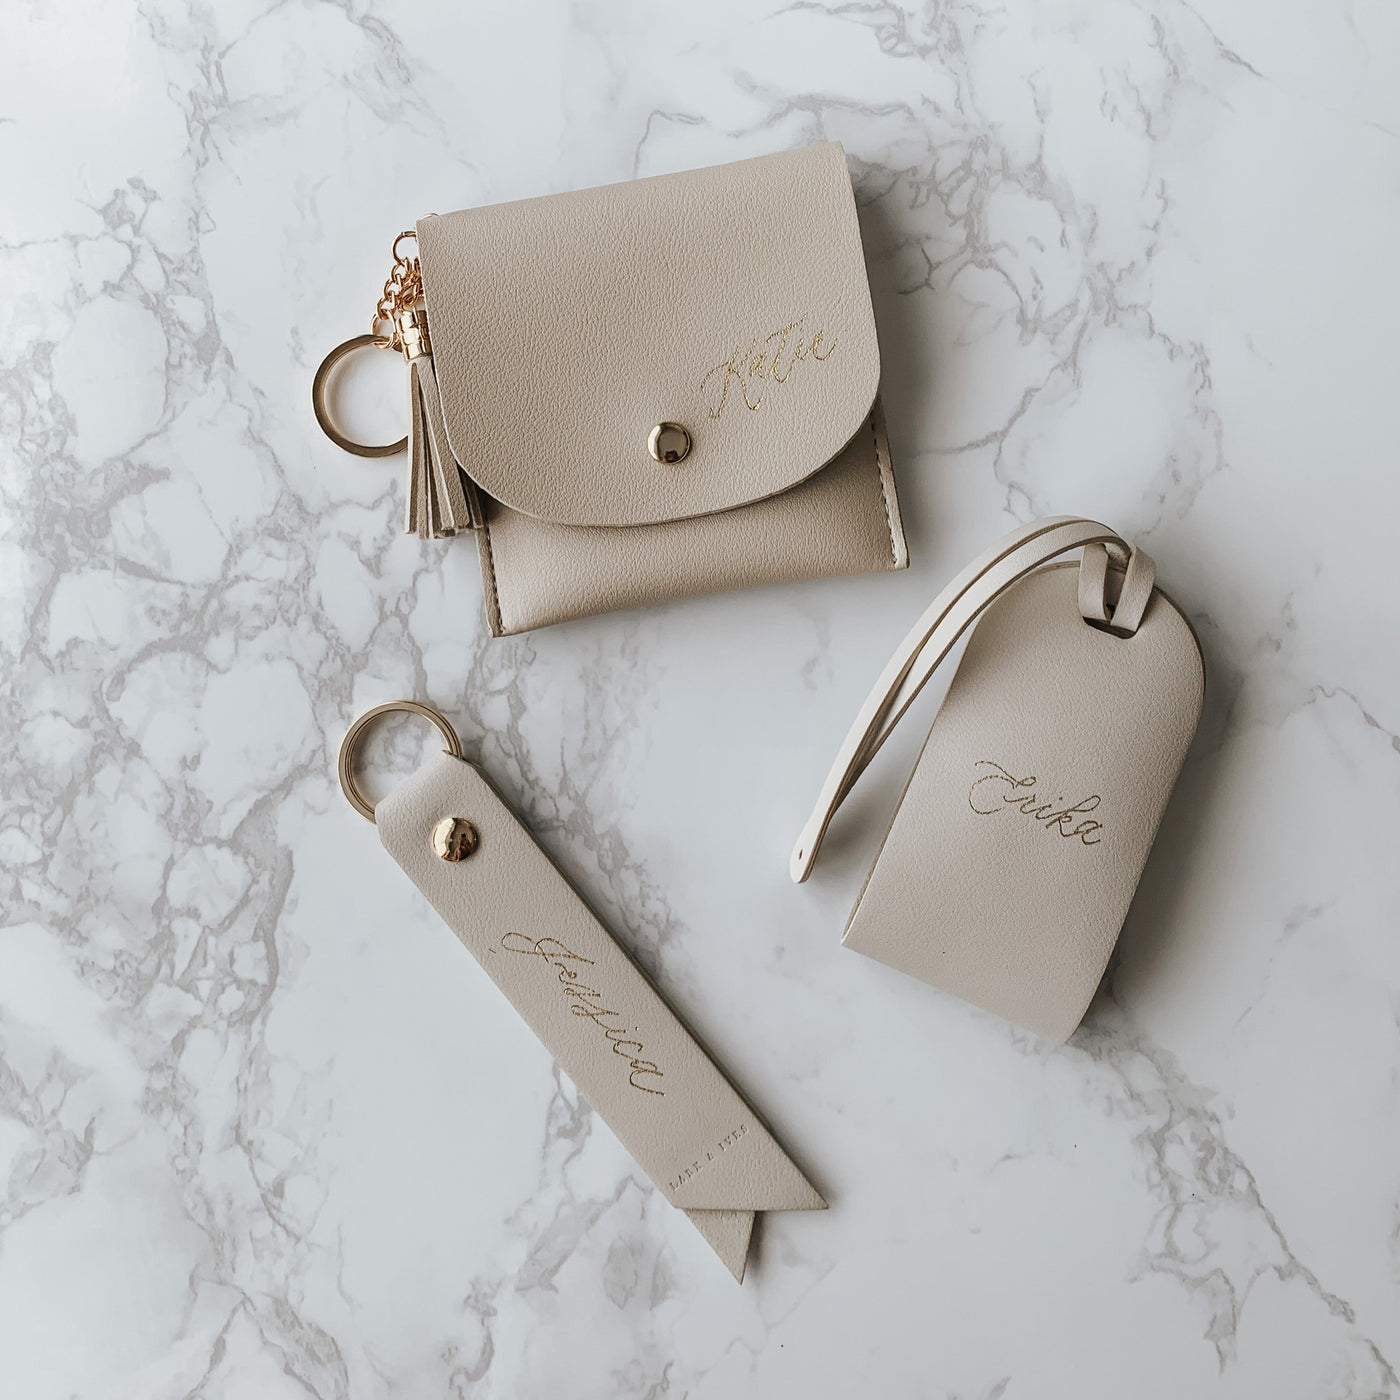 Lark and Ives / Vegan Leather Accessories / Travel Accessories / Luggage Tag / Luggage ID / Travel Tag / Minimalist Accessories / Neutral Colours / Gold Foil Personalized Luggage Tag, Card Purse and Keyholder